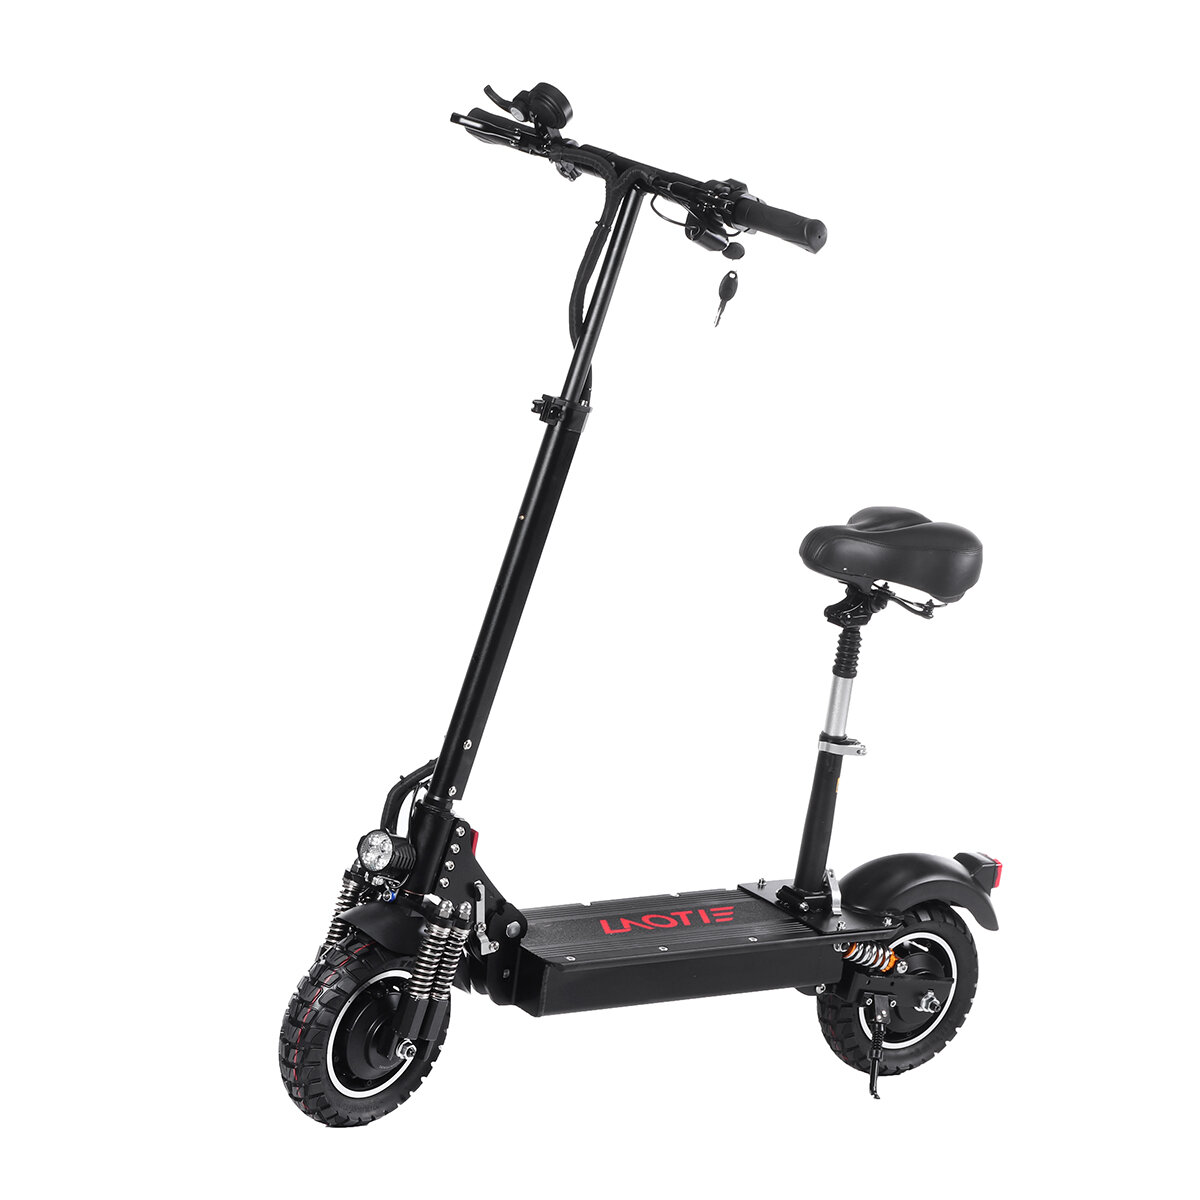 LAOTIE® ES10P 2000W Dual Motor 28.8Ah 21700 Battery 52V 10 Inches Folding Electric Scooter with Seat 100km Mileage Max Load 120Kg